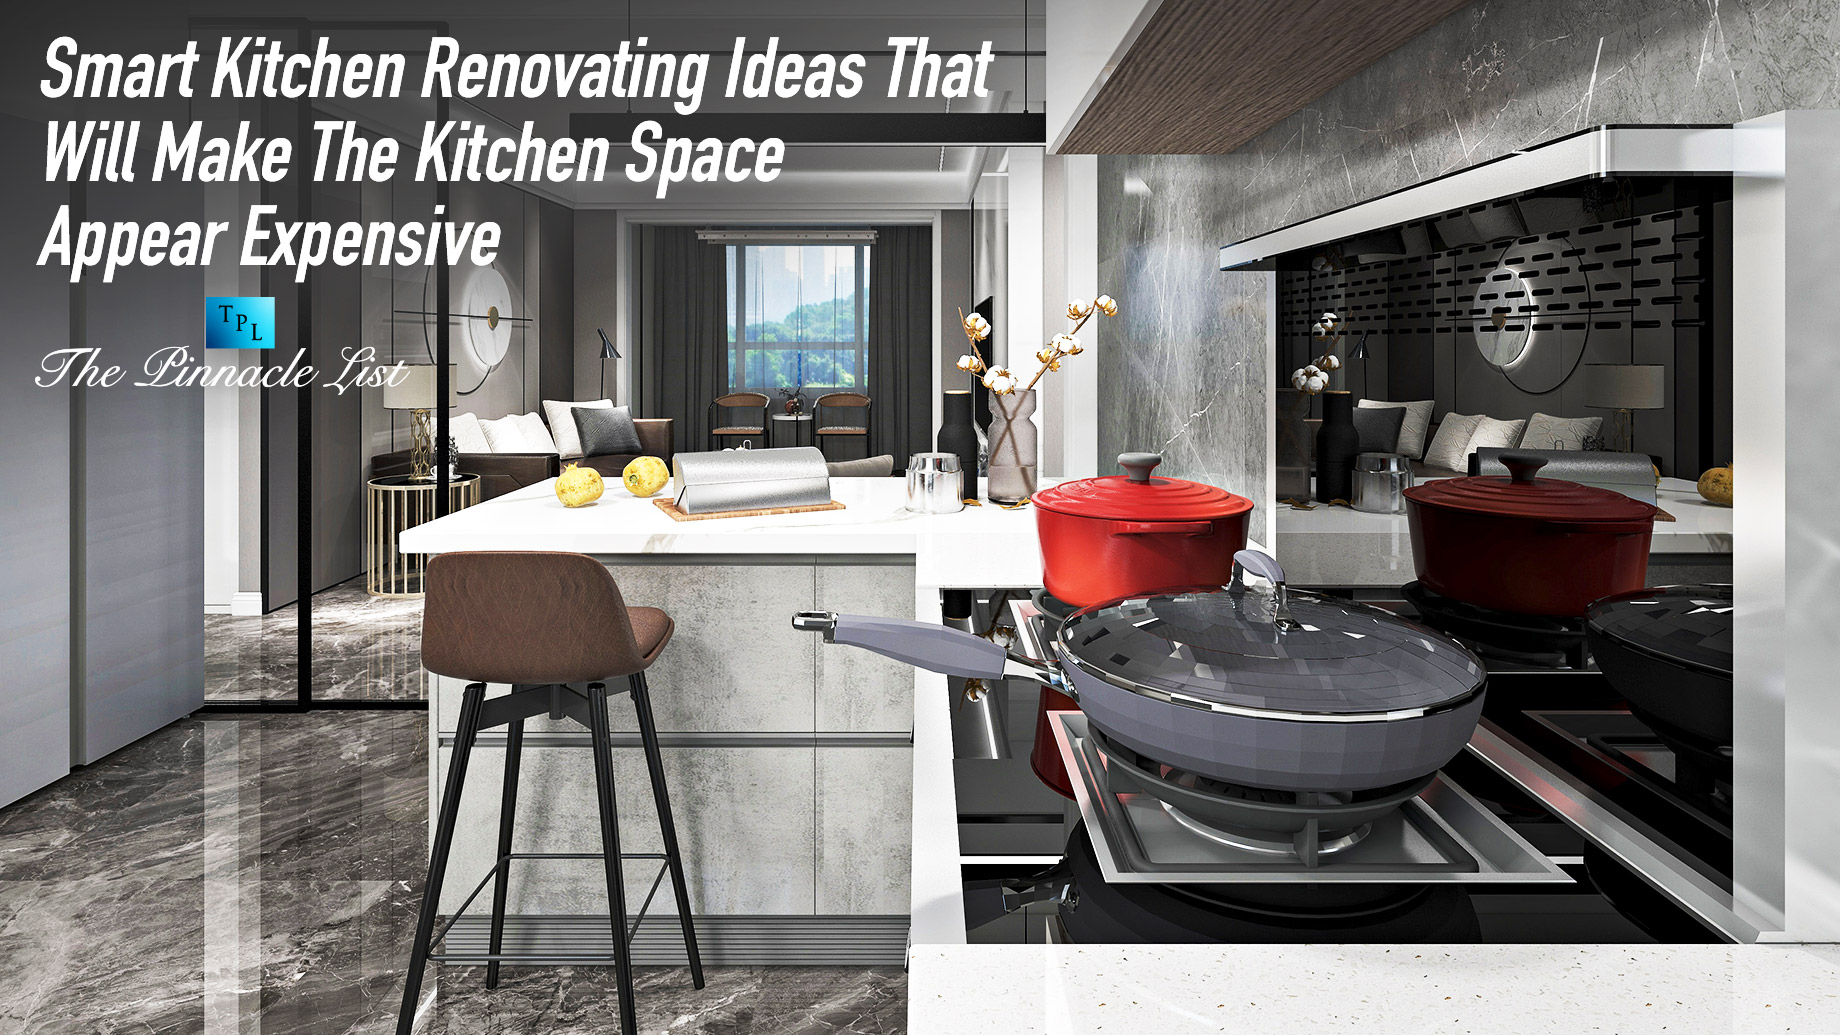 Smart Kitchen Renovating Ideas That Will Make The Kitchen Space Appear Expensive